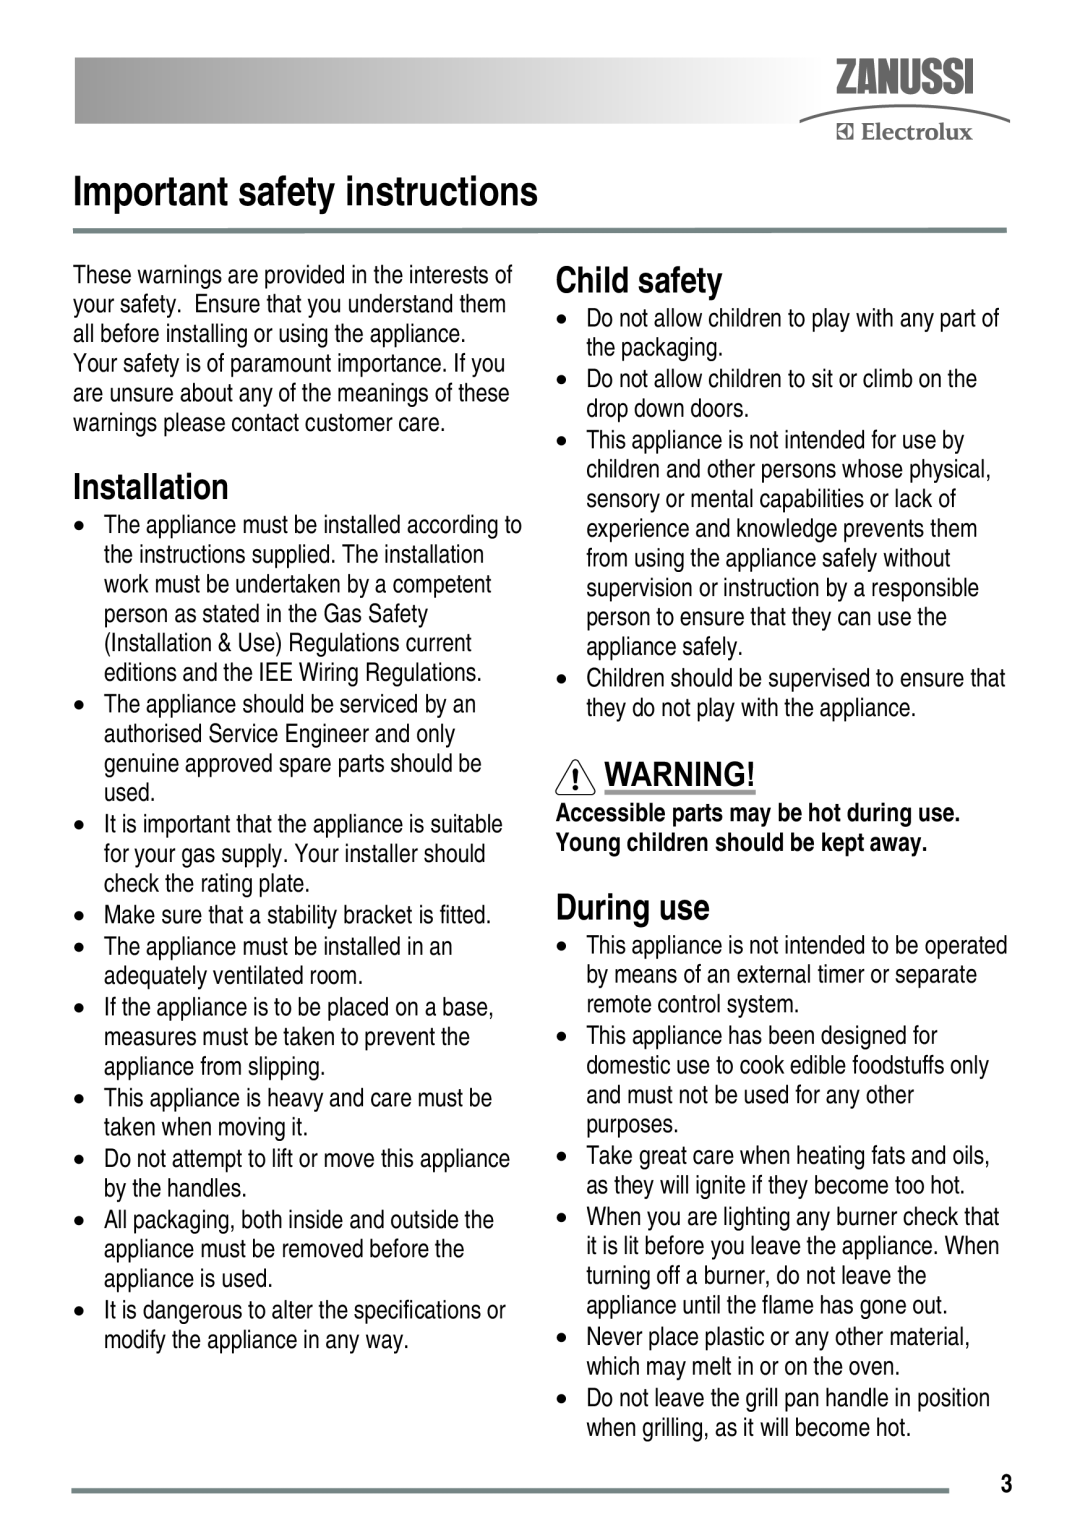 Zanussi ZKG5020 manual Important safety instructions, Installation, Child safety, During use 